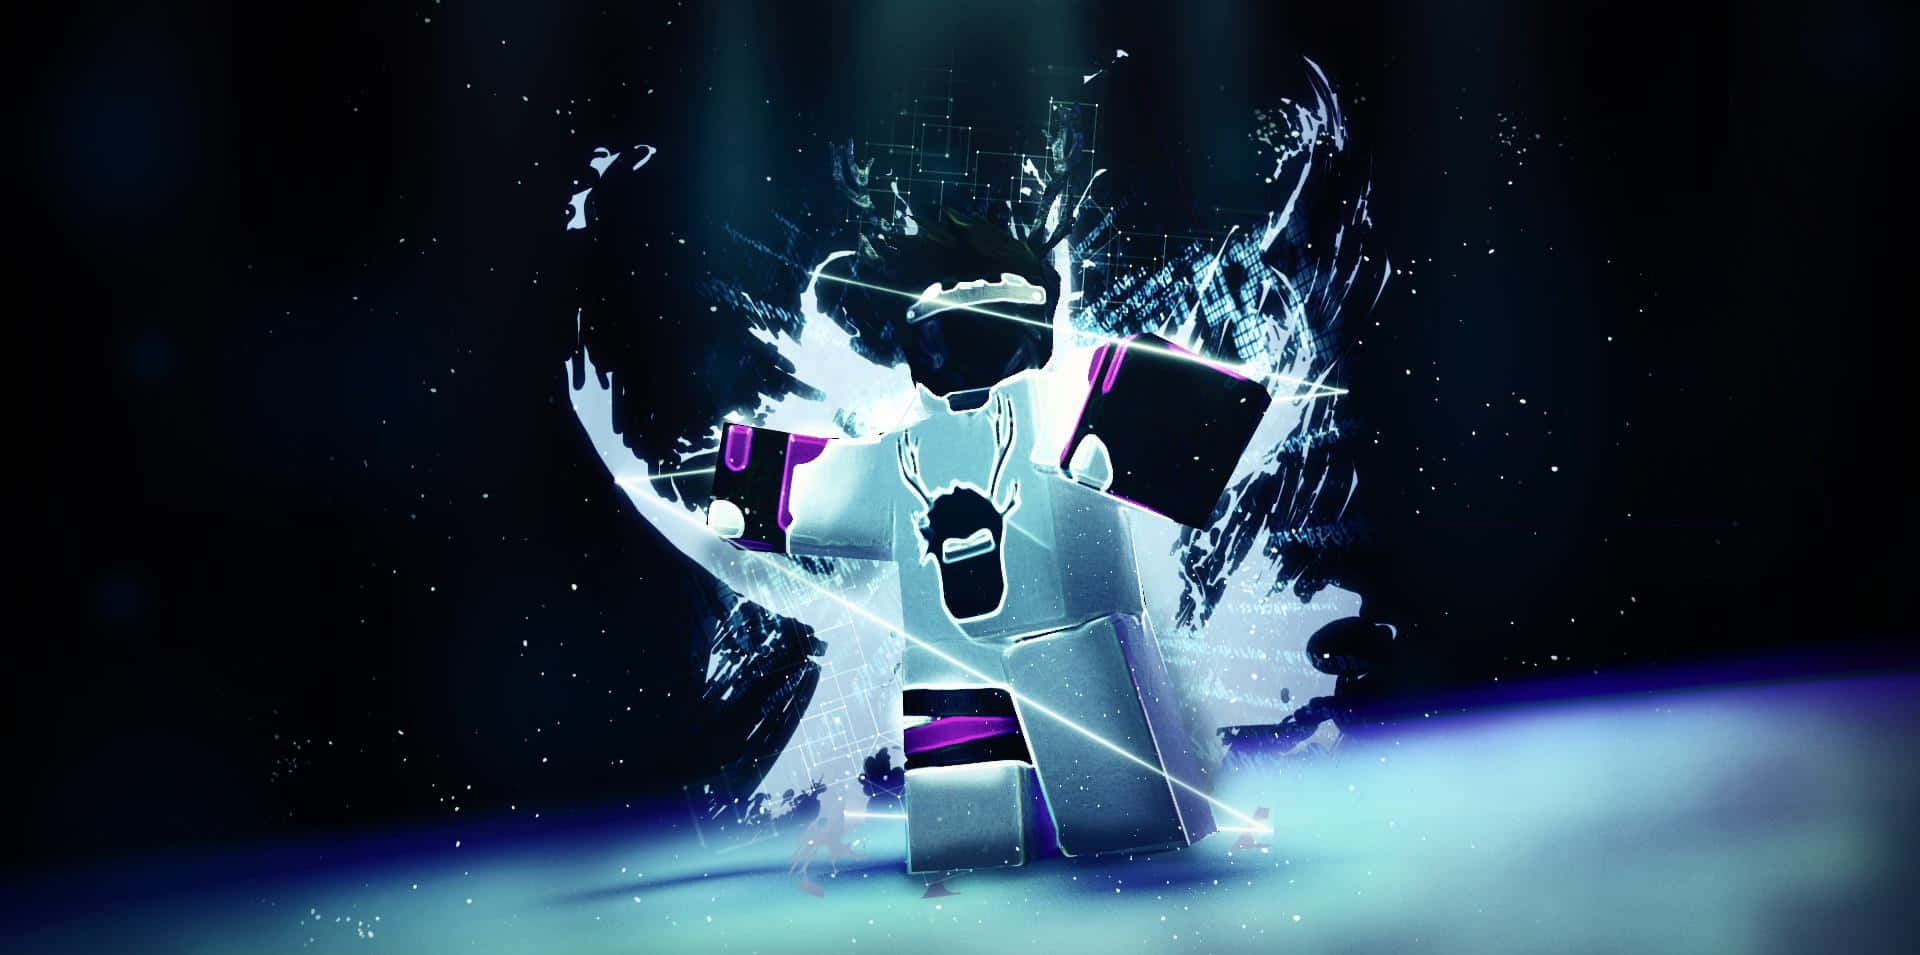 Show off your Roblox Blue pride! Wallpaper